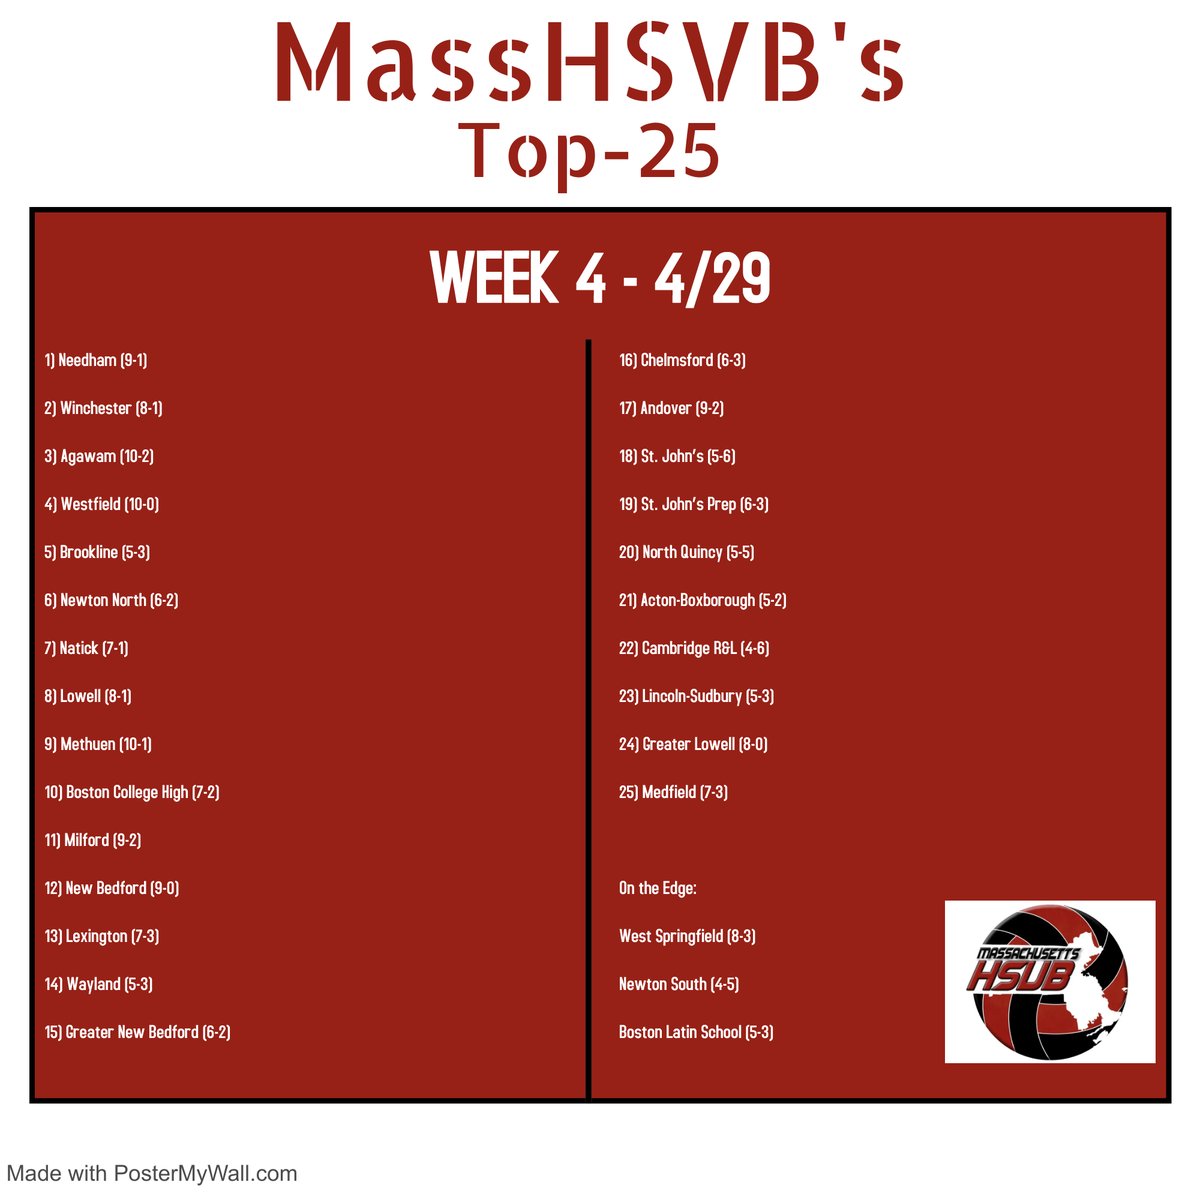 THIS WEEK'S TOP-25: Check out the full rankings here: masshsvb.com/rankings